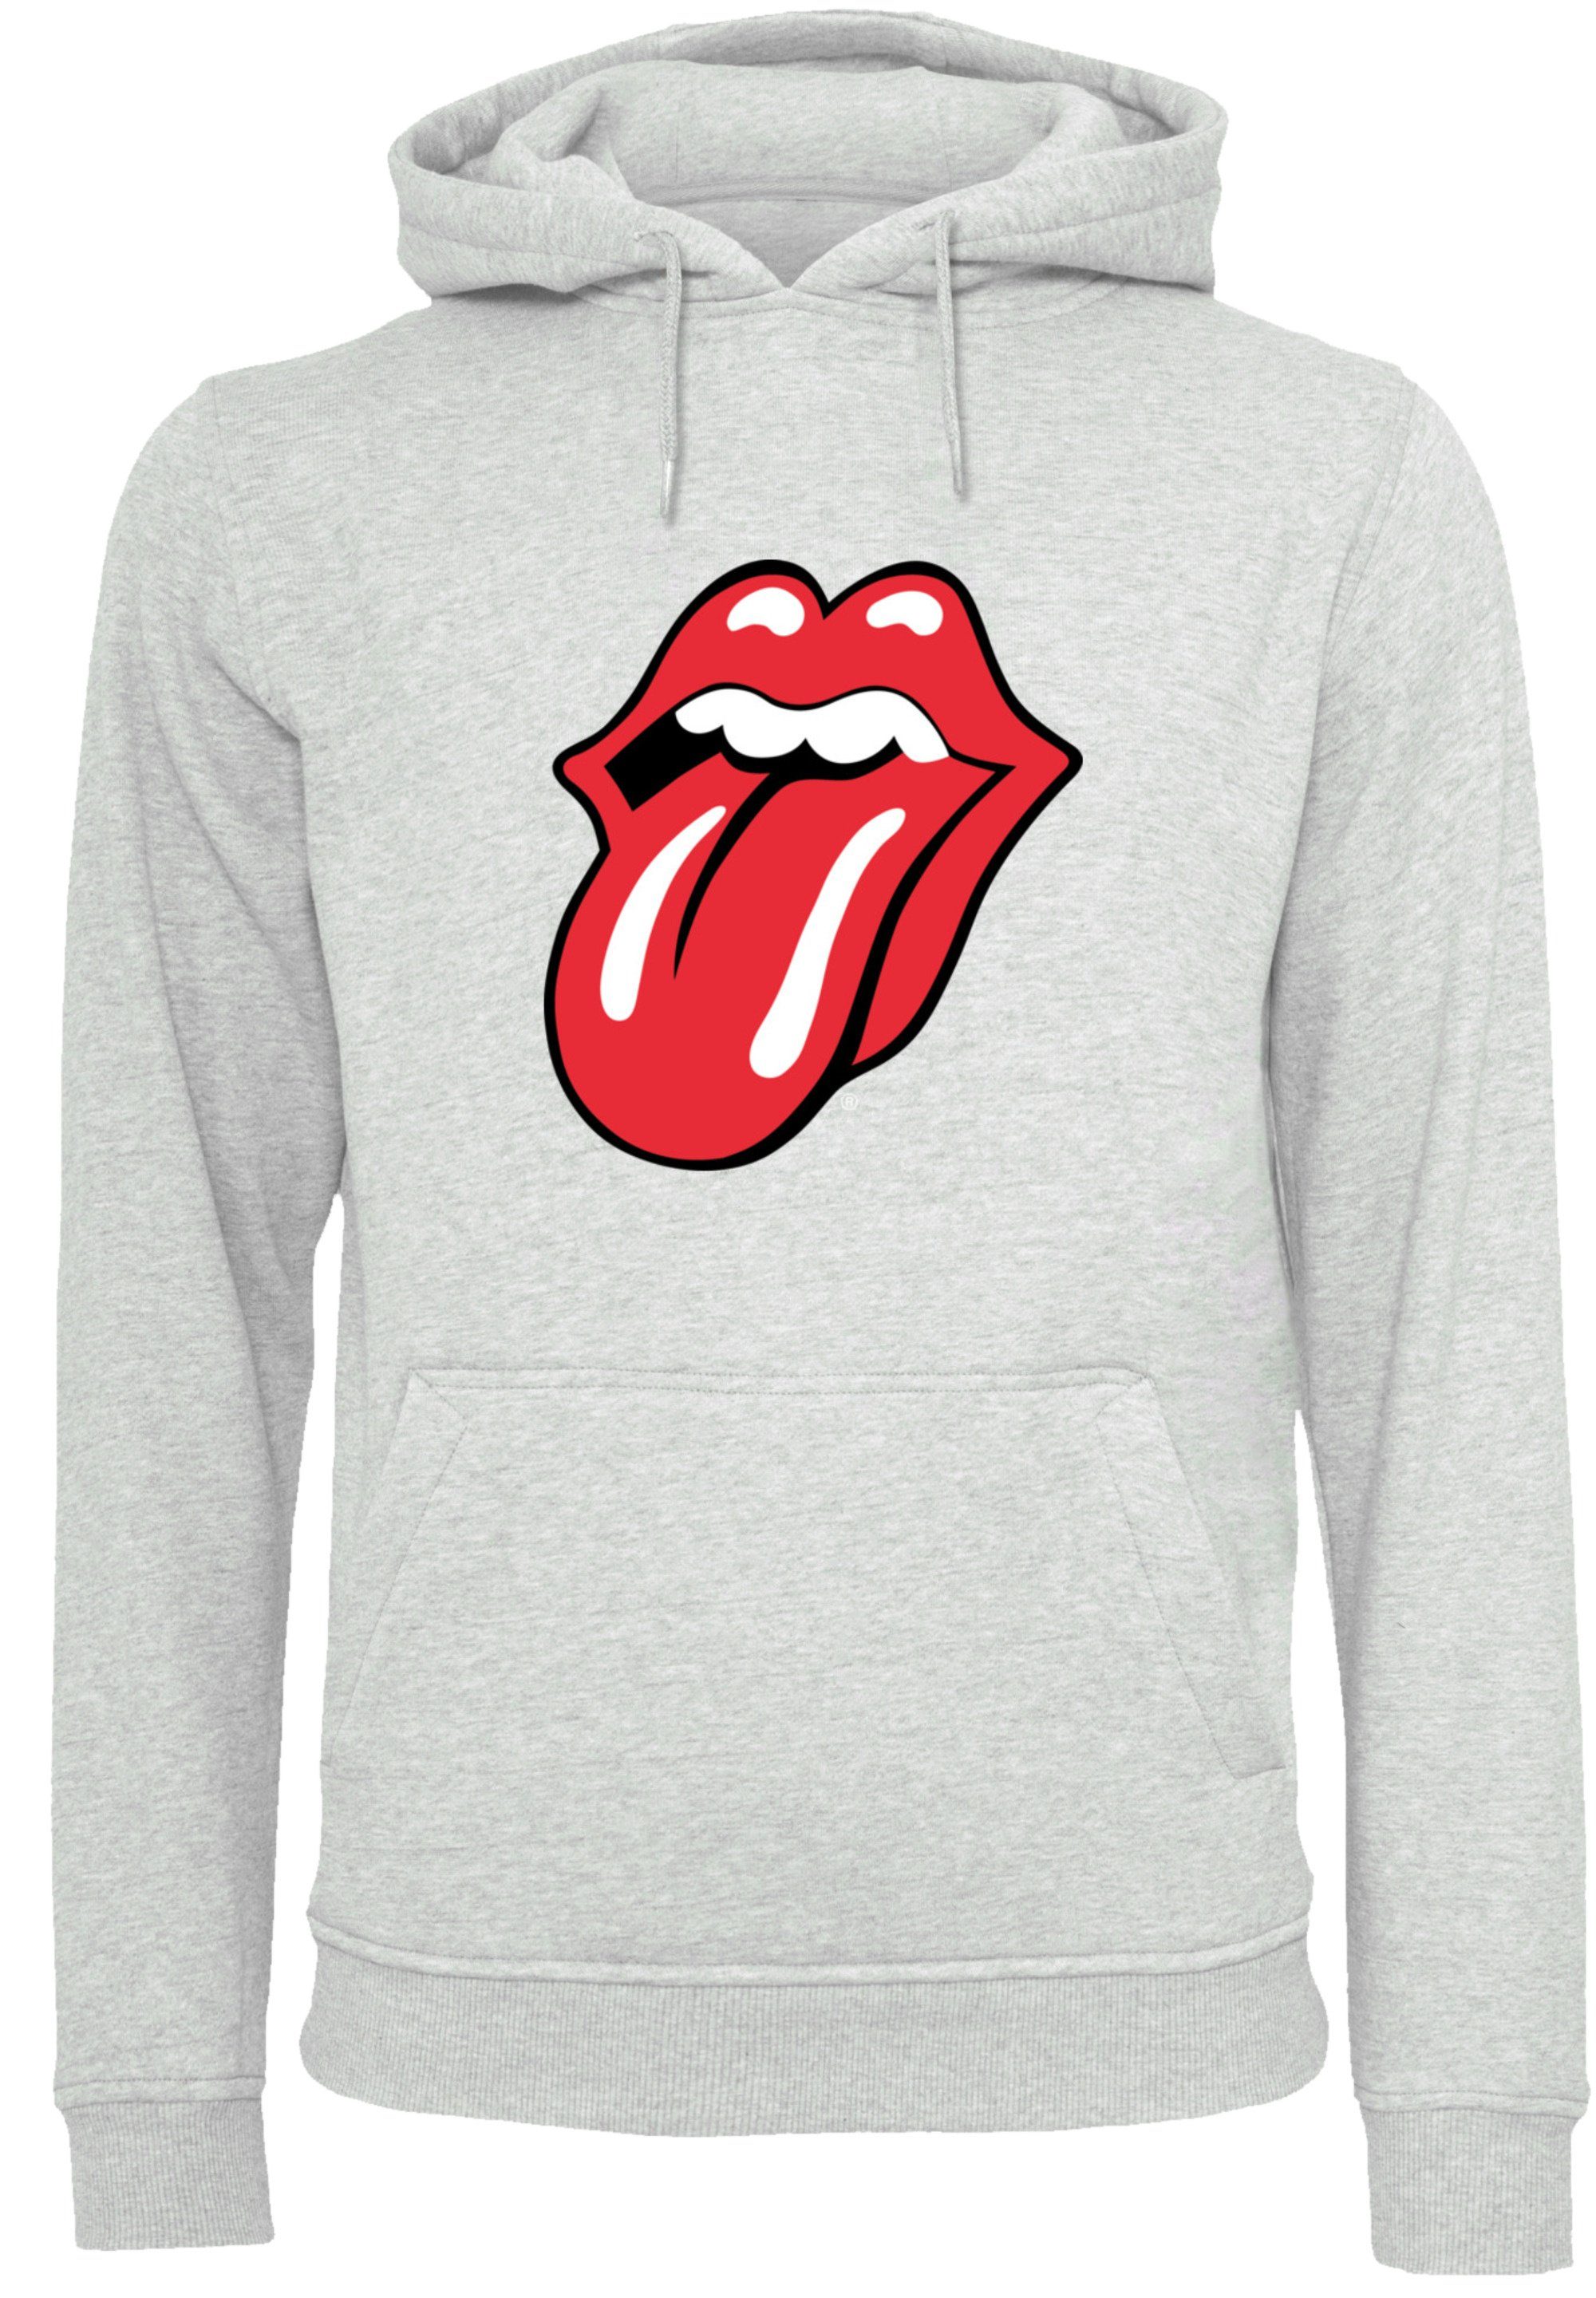 F4NT4STIC Kapuzenpullover The Rolling Stones Classic Zunge Rock Musik Band Hoodie, Warm, Bequem heather grey